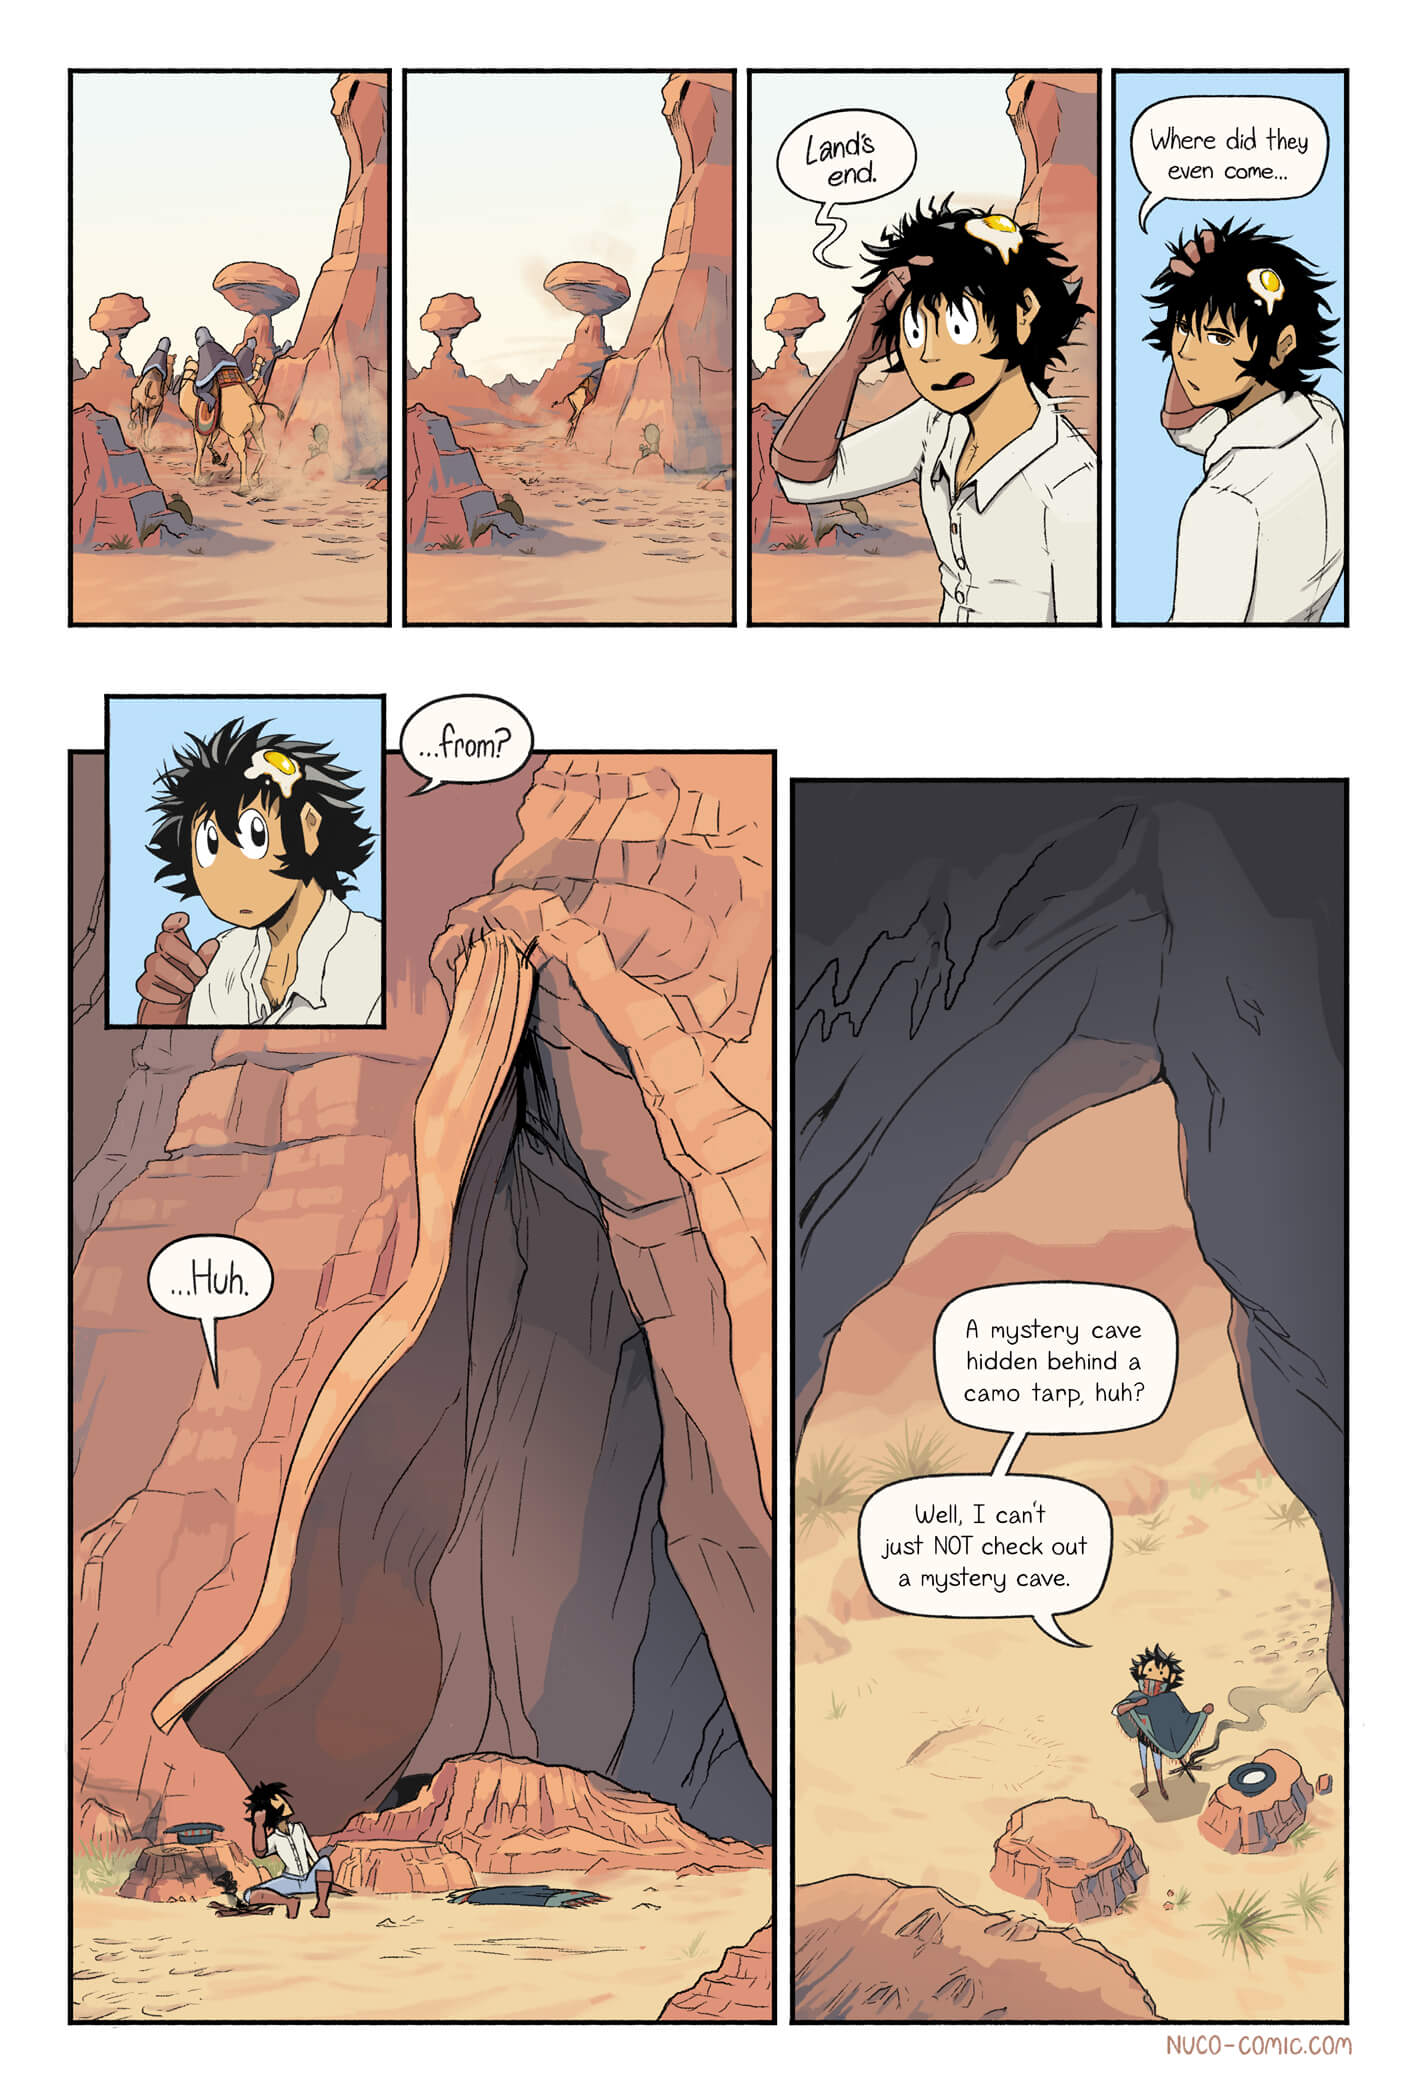 The author is tired of drawing mesas lets go in a cave